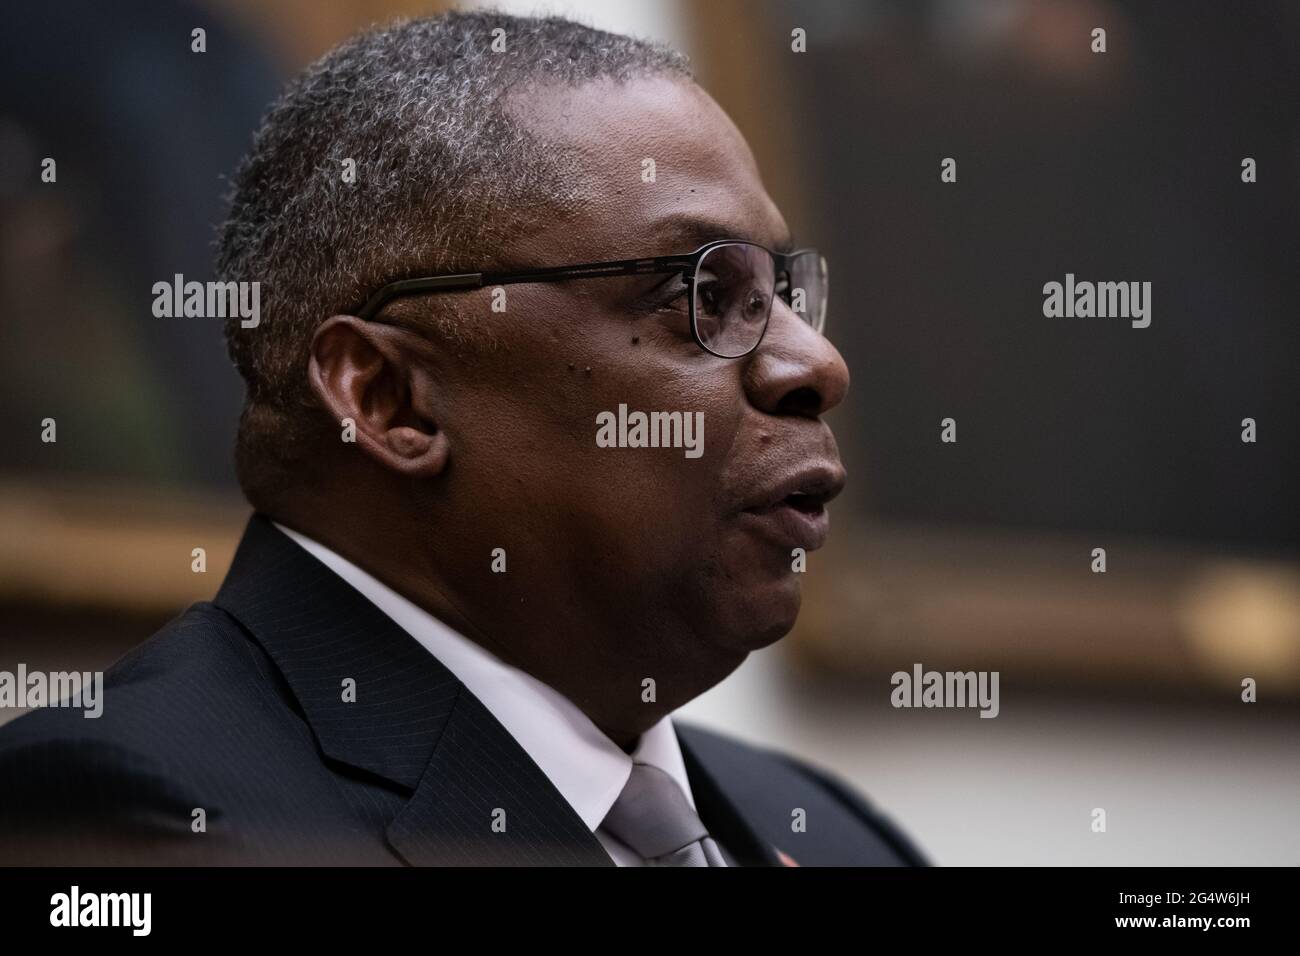 Washington, USA. 23rd June, 2021. Secretary of Defense Lloyd Austin testifies during a House Armed Services Committee hearing, at the U.S. Capitol, in Washington, DC, on Wednesday, June 23, 2021. Last night Senate Republicans filibustered a voting rights bill as bipartisan negotiations over infrastructure legislation grind on with little apparent progress building a package to beat the 60-vote filibuster threshold. (Graeme Sloan/Sipa USA) Credit: Sipa USA/Alamy Live News Stock Photo